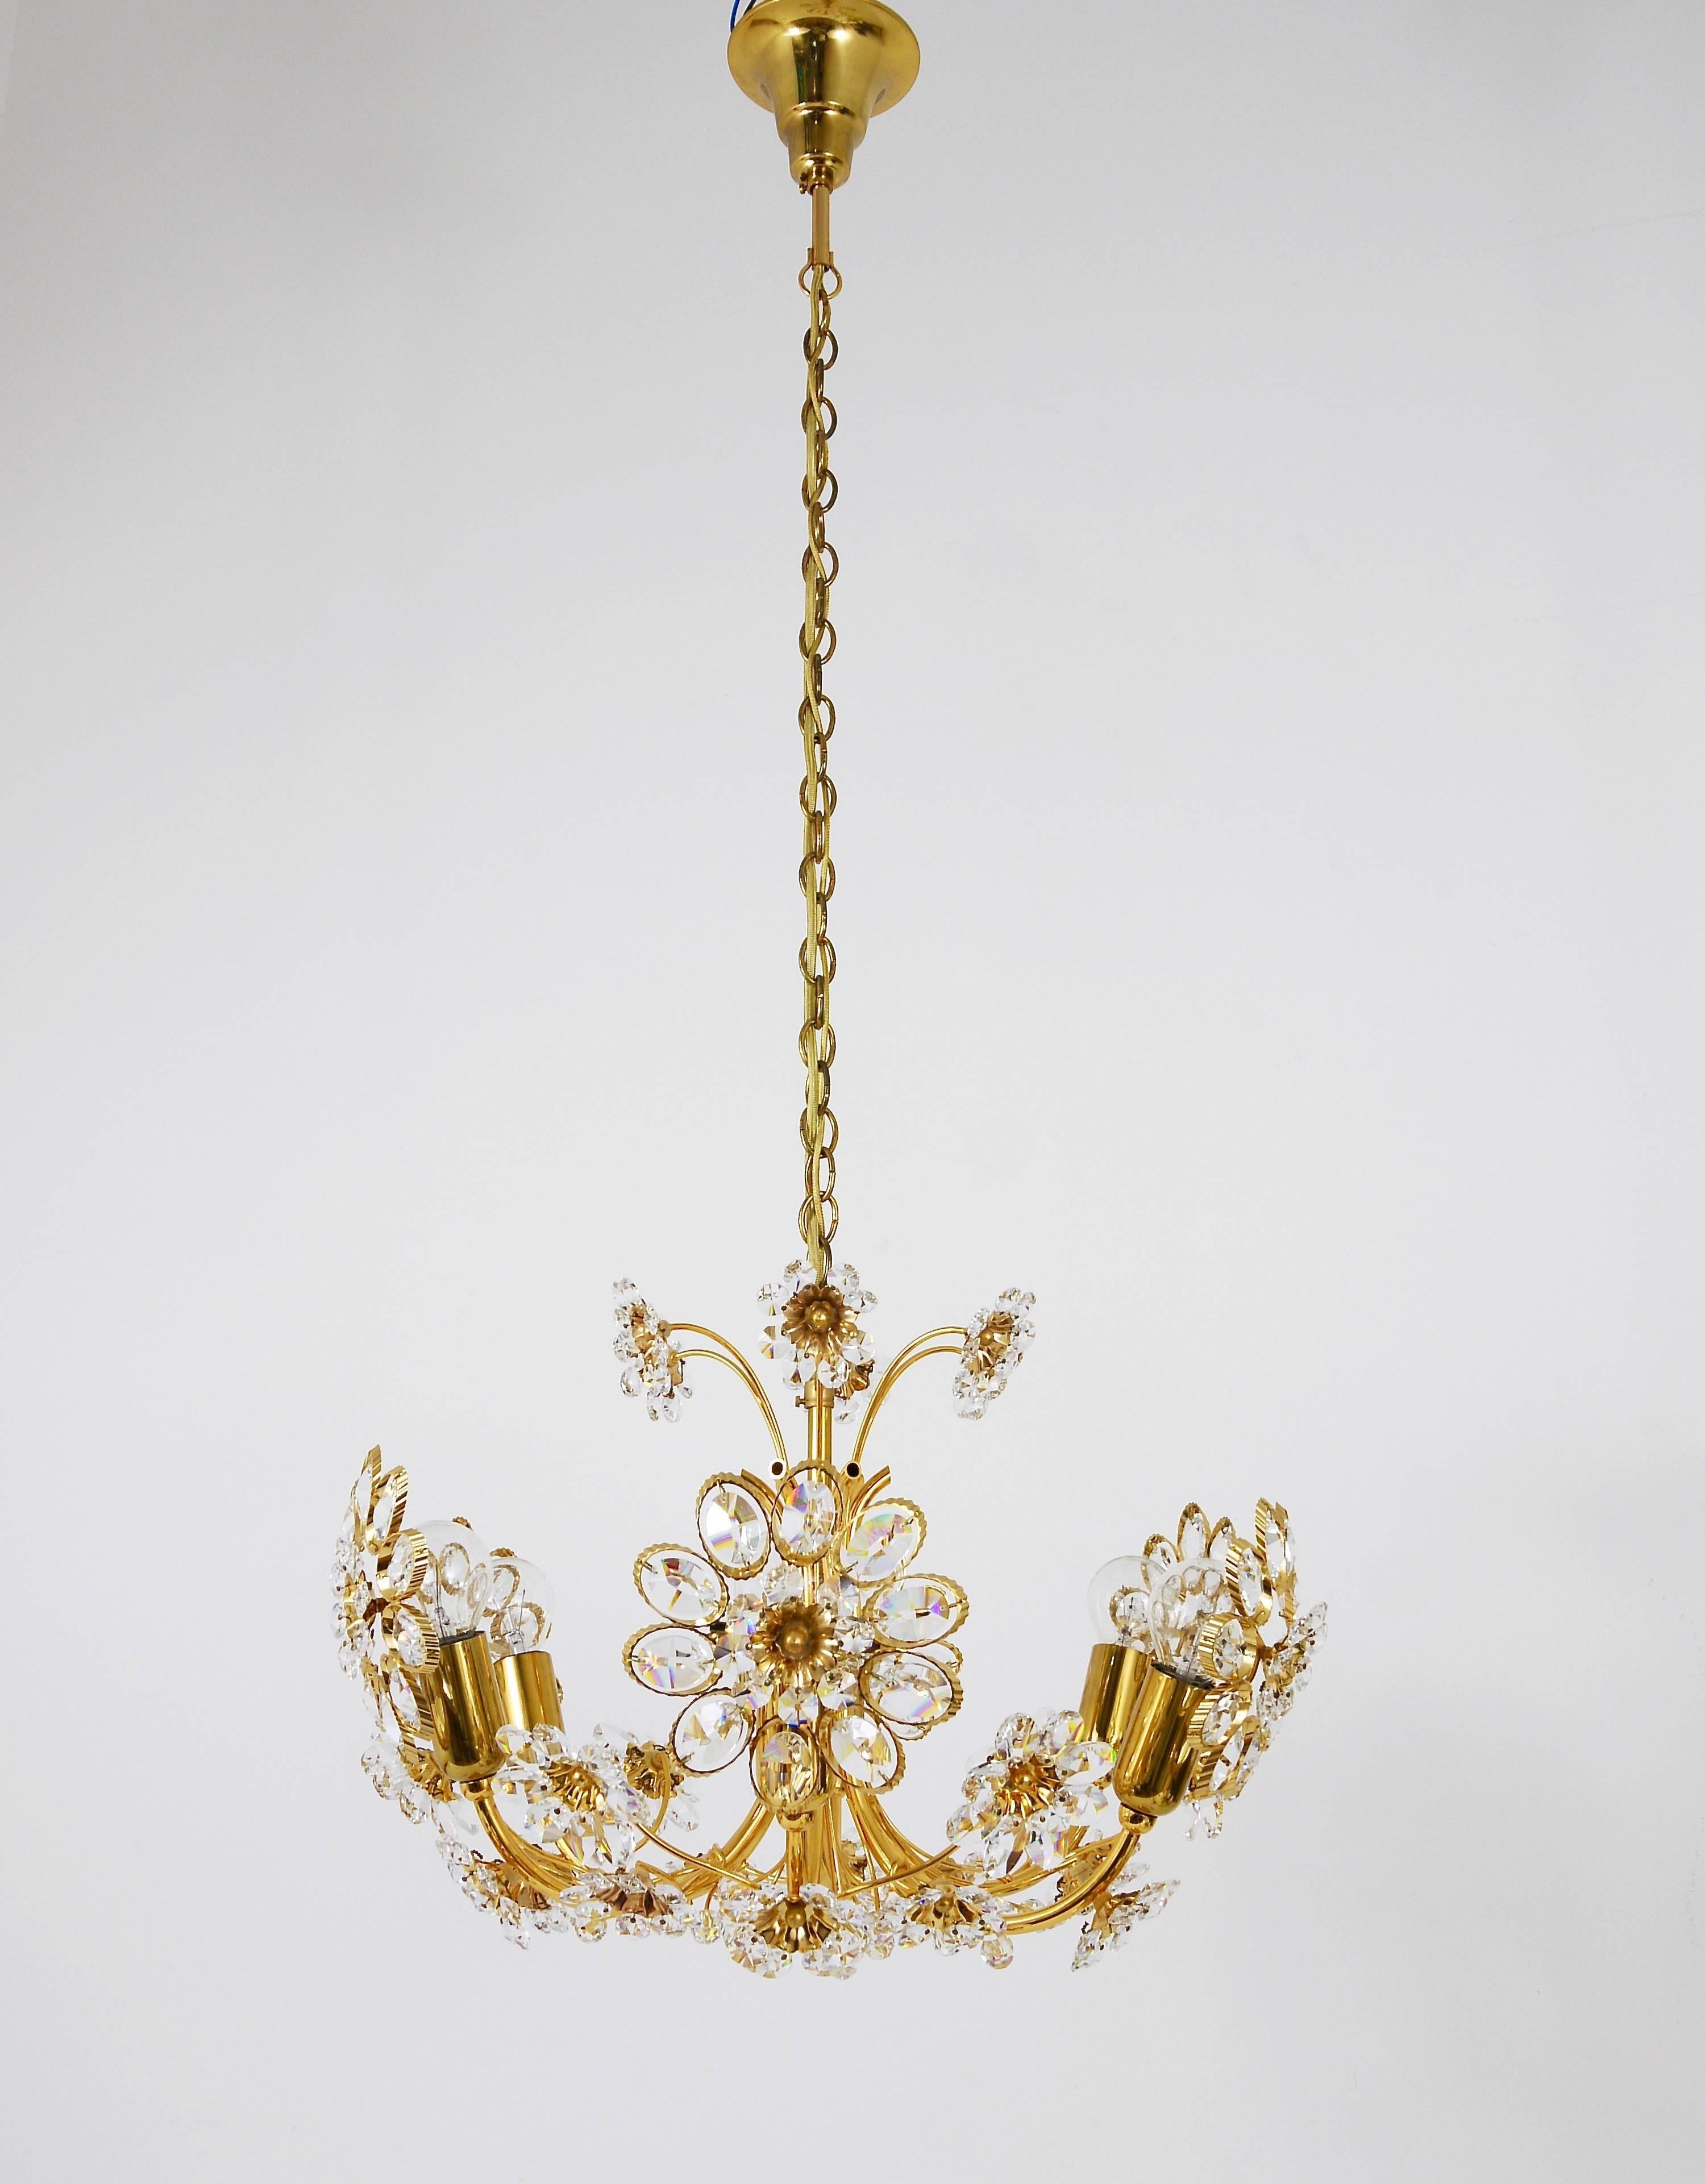 A beautiful handcrafted floral chandelier, manufactured in the 1970s by Palwa Germany. Made of gold-plated brass with faceted crystal glass petals. Has six light sources. In excellent condition.
Please see our matching sconces and wall mirrors in